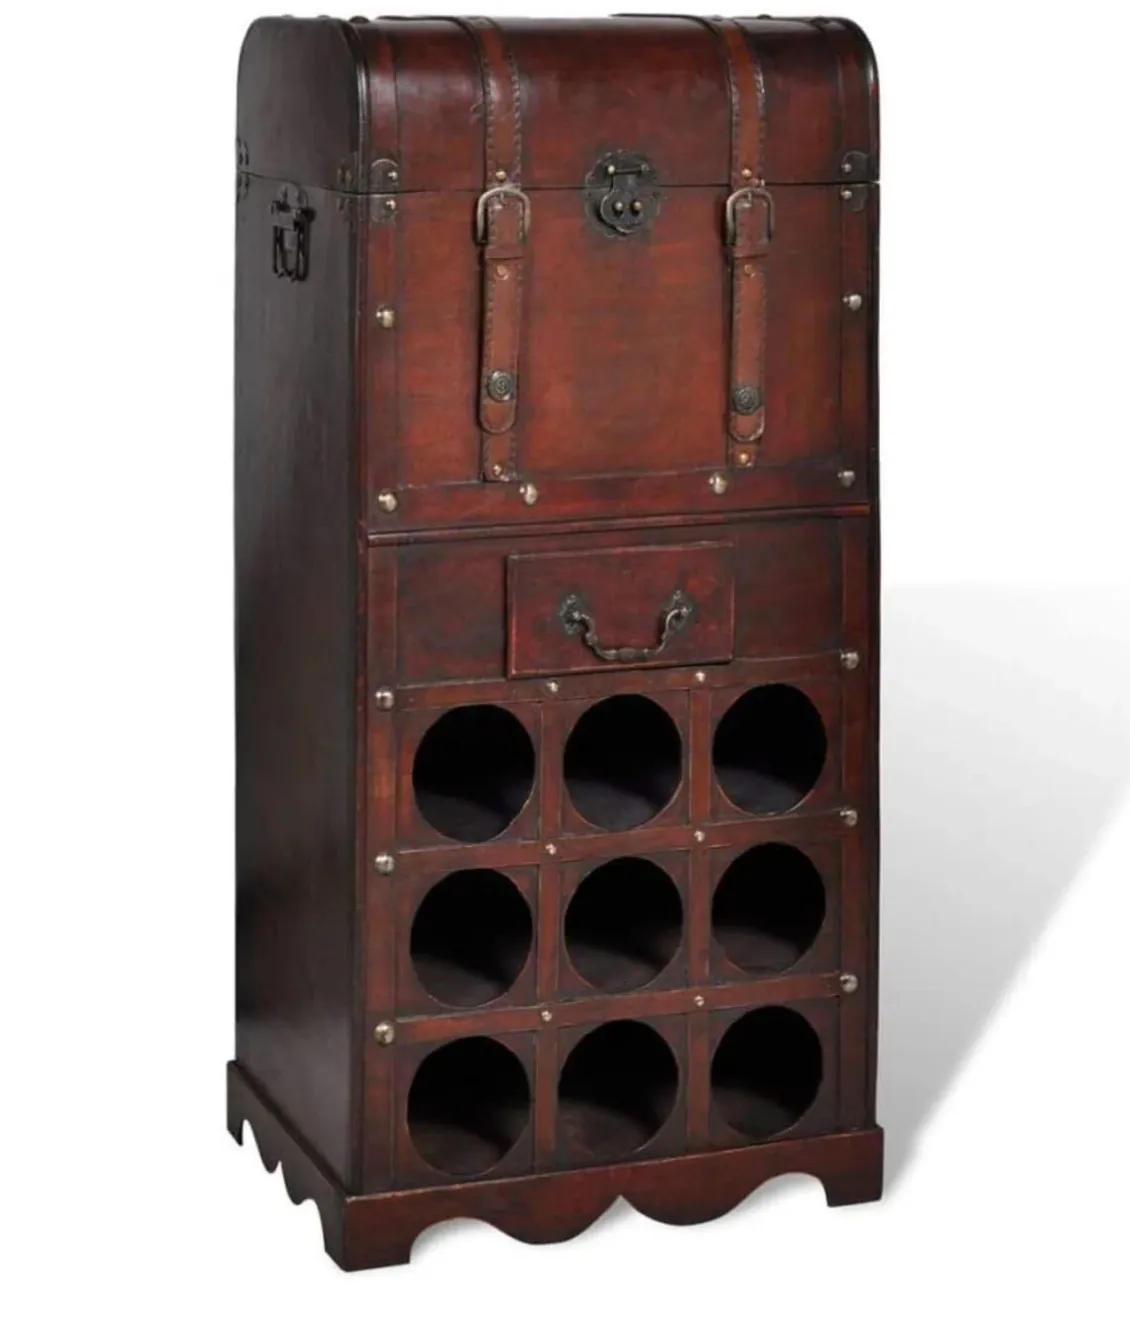 Where to buy trunk bar cabinets, 2022's hot new trend - Your Home Style